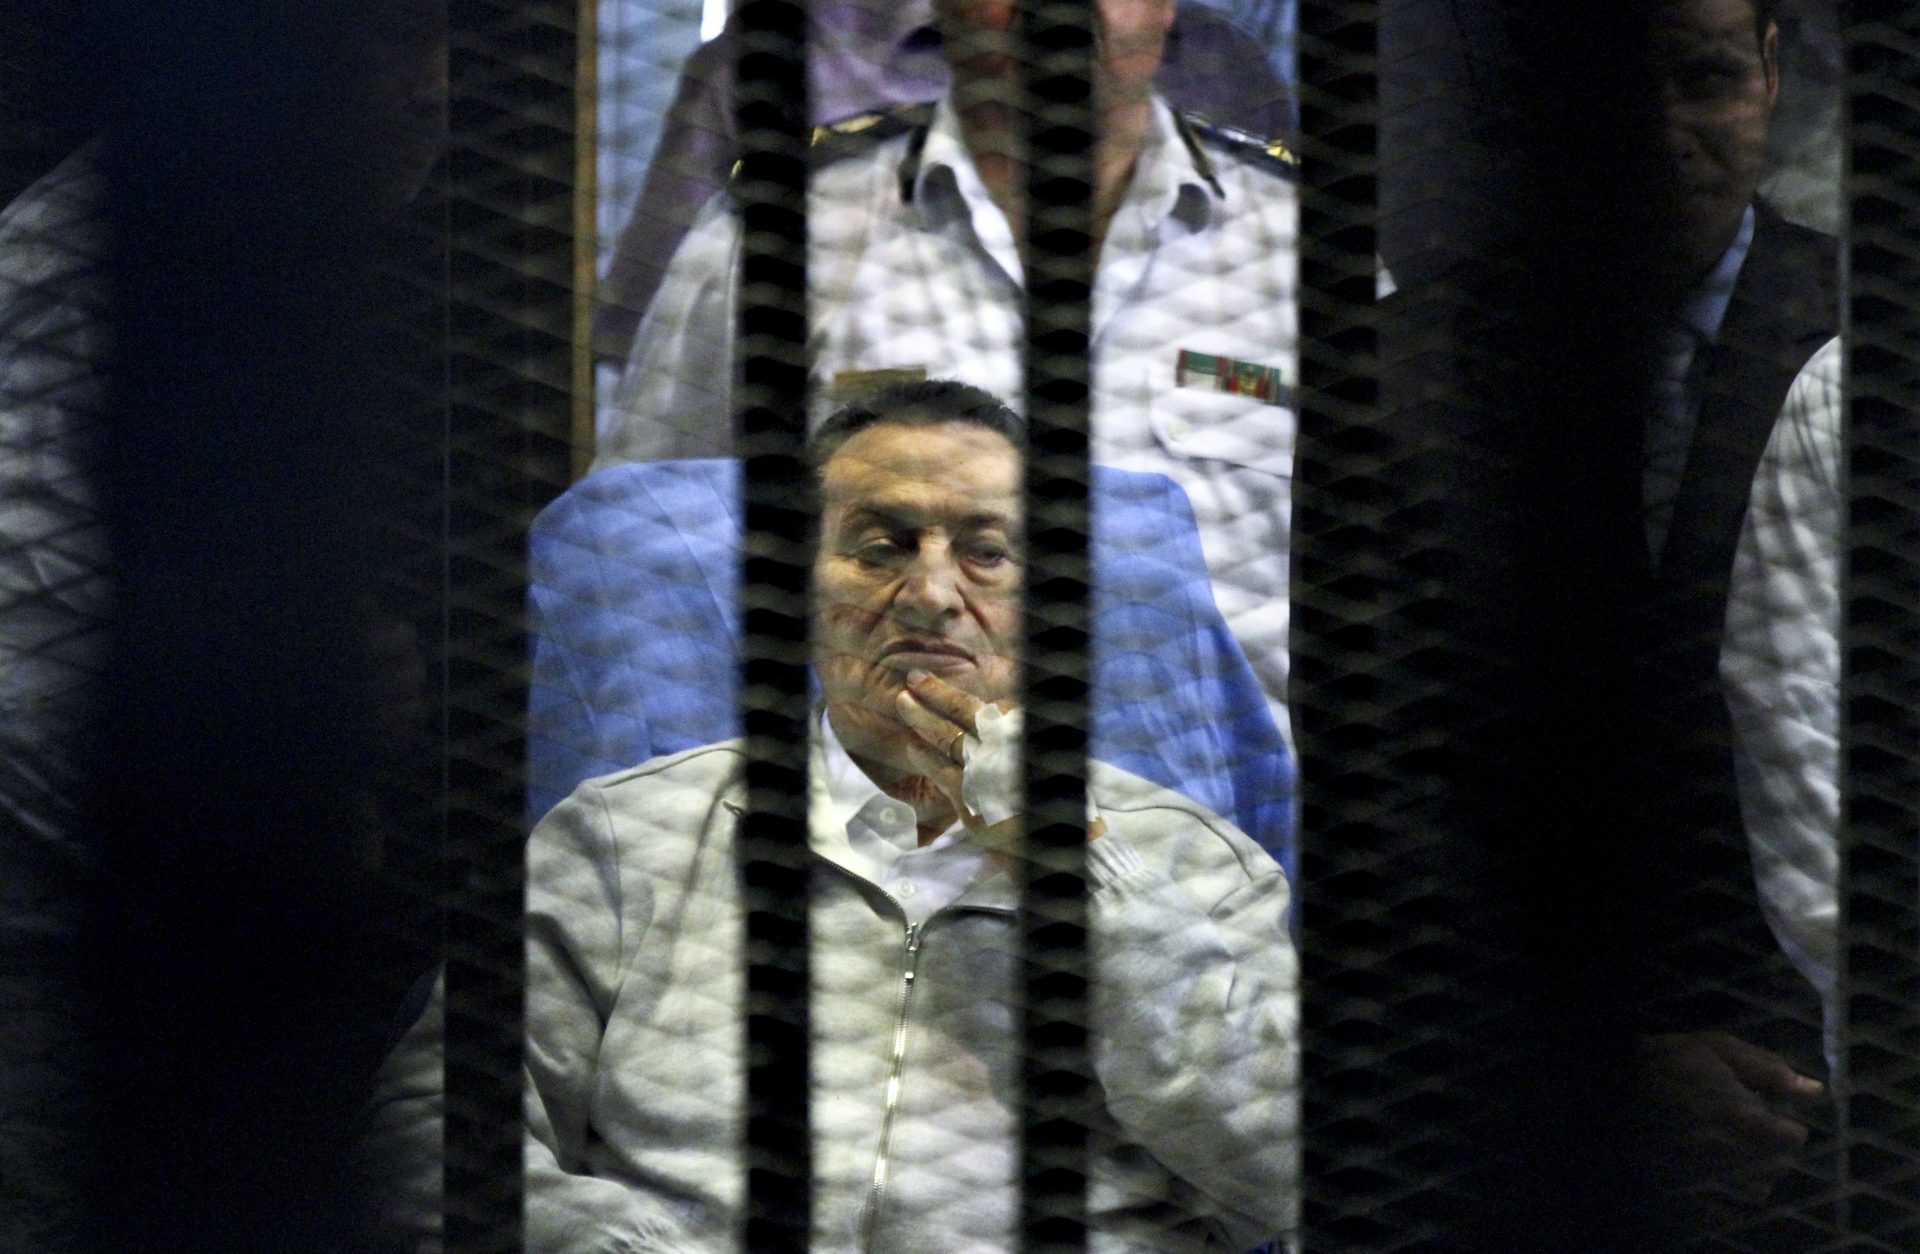 Egypt's deposed President Hosni Mubarak attends a hearing session in his retrial on appeal in Cairo, Egypt, Monday, April 15, 2013. Mubarak will remain in custody on new corruption charges despite a court order to release him on bail pending his retrial on charges related to killing of protesters in the 2011 uprising against him, Egypt’s state news agency said Monday.